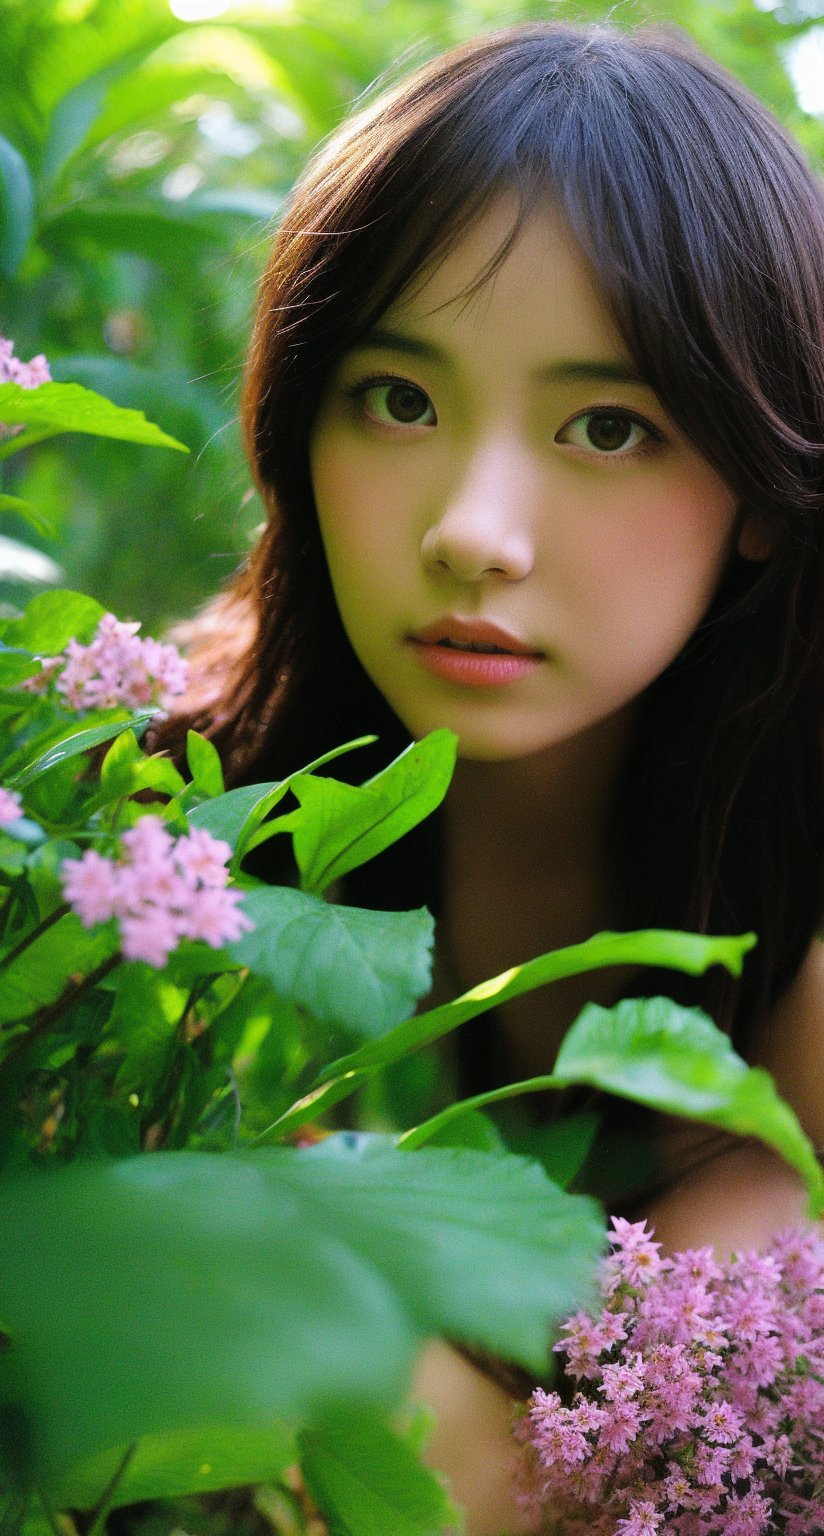 A photorealistic close-up of a single girl looking directly at the viewer from amidst a lush garden backdrop. Her gaze is intense and intimate, as if sharing a secret or inviting the audience to step into her dreamlike world. Vibrant flowers surround her, their colors blending with the soft focus of her skin, creating a sense of depth and dimensionality.